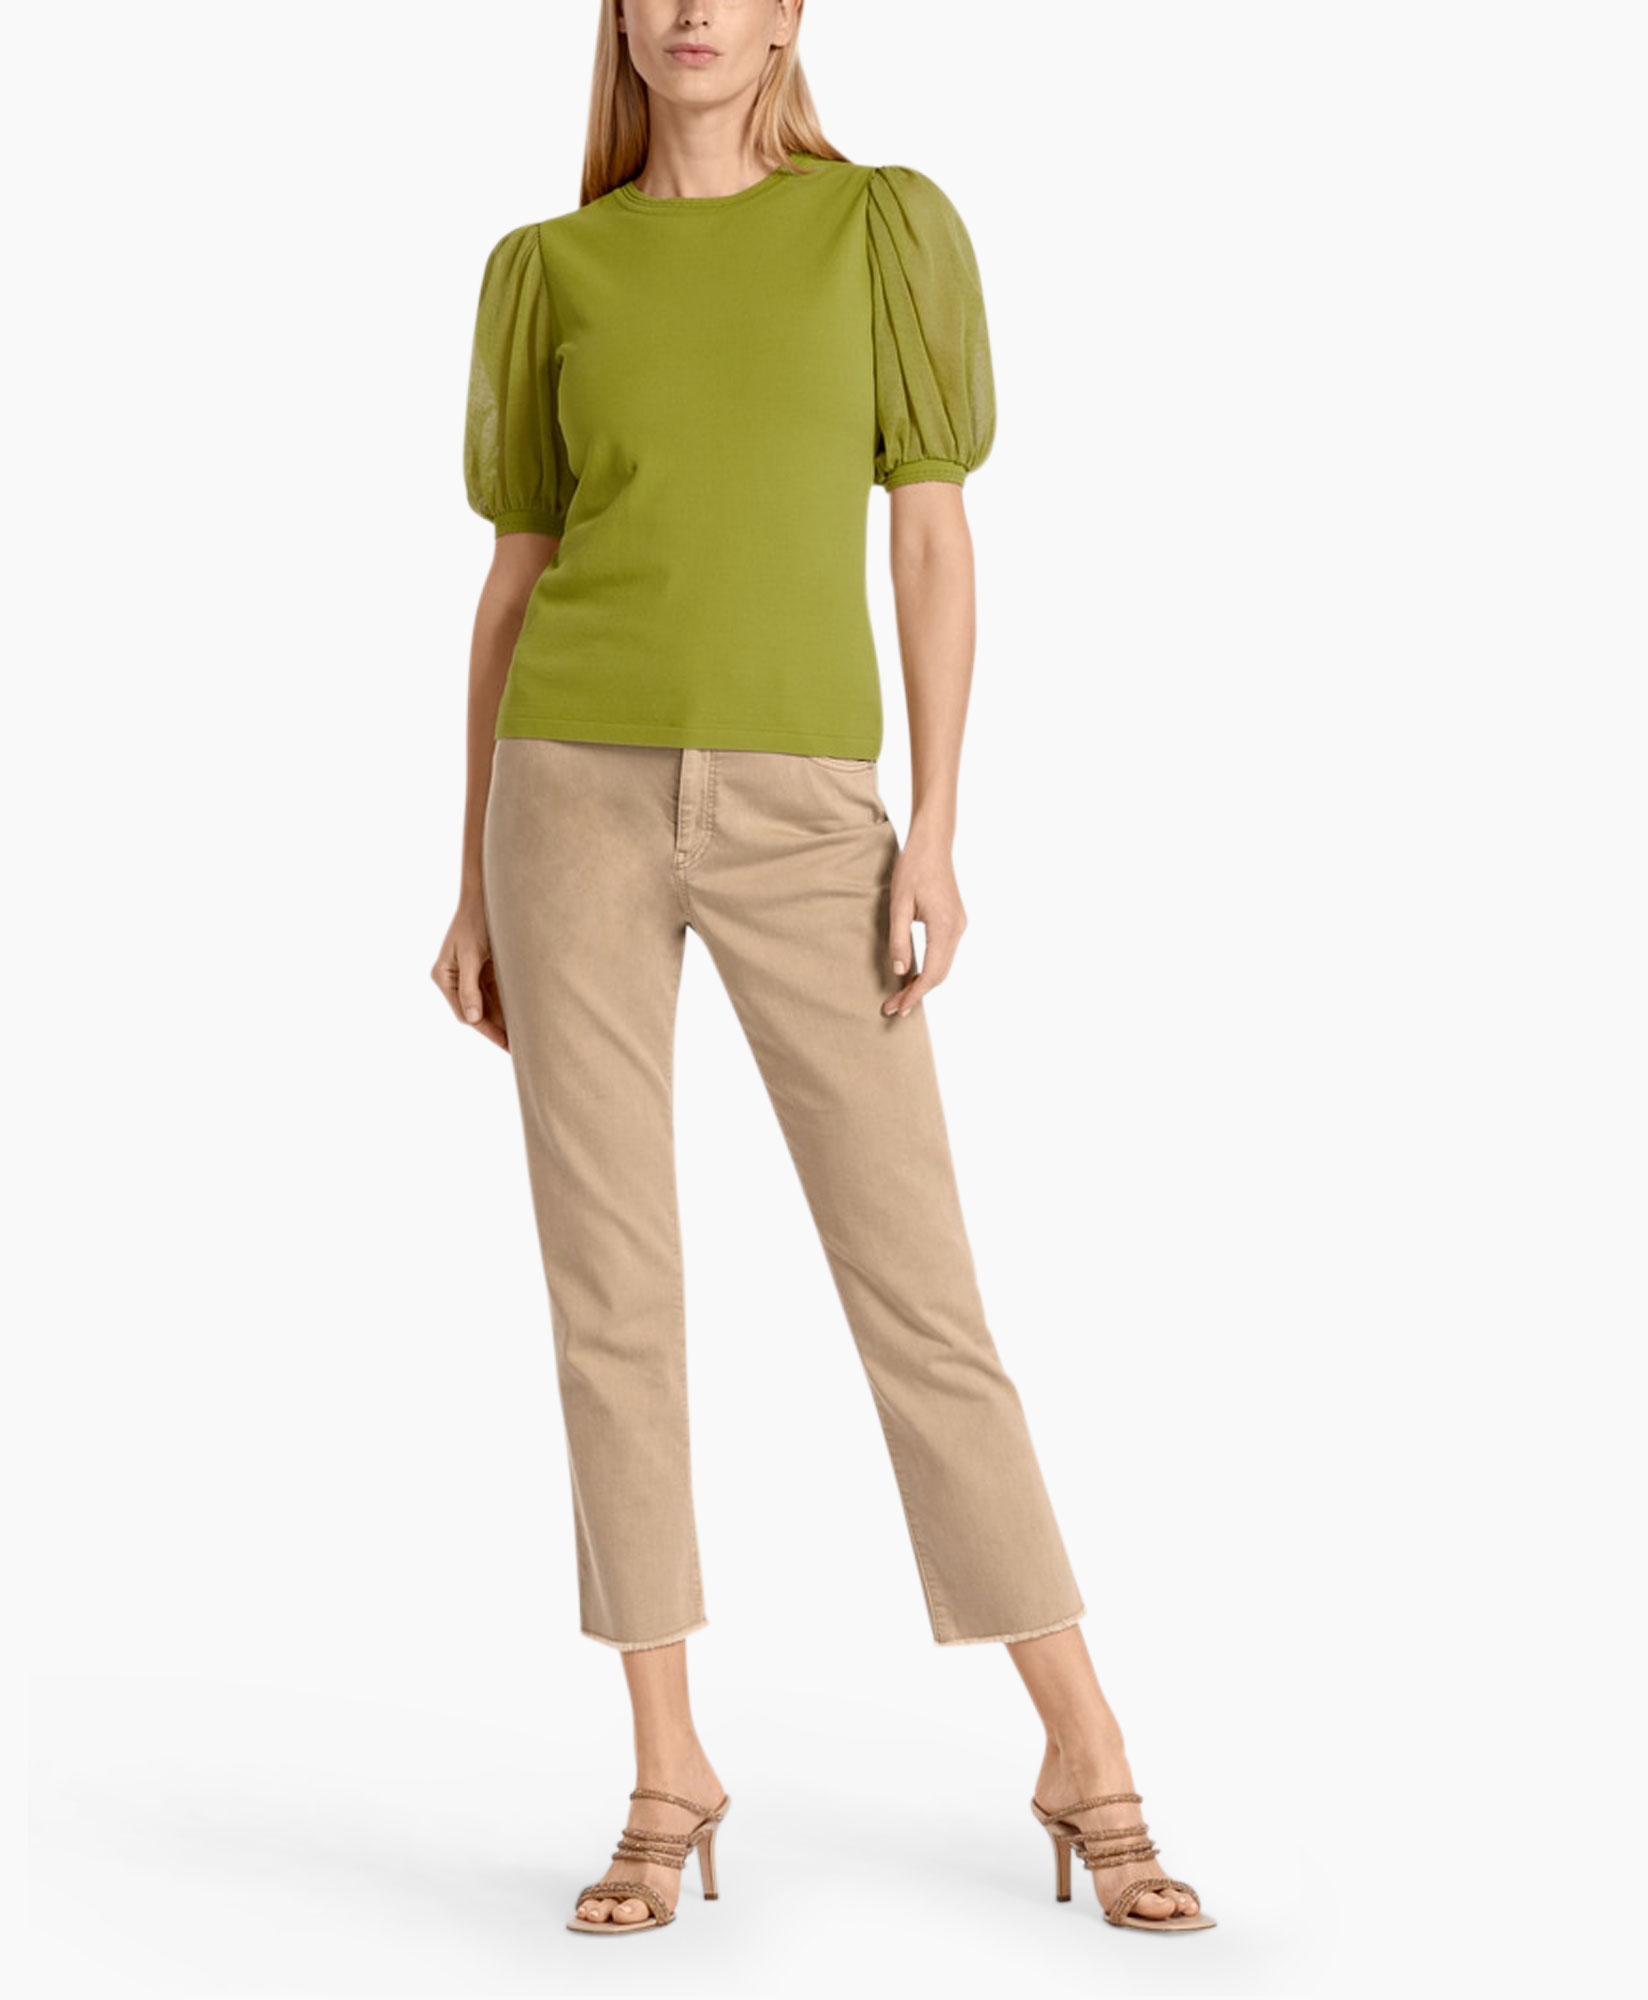 Marccain Collectie Pullover Uc 41.31 M35 Groen